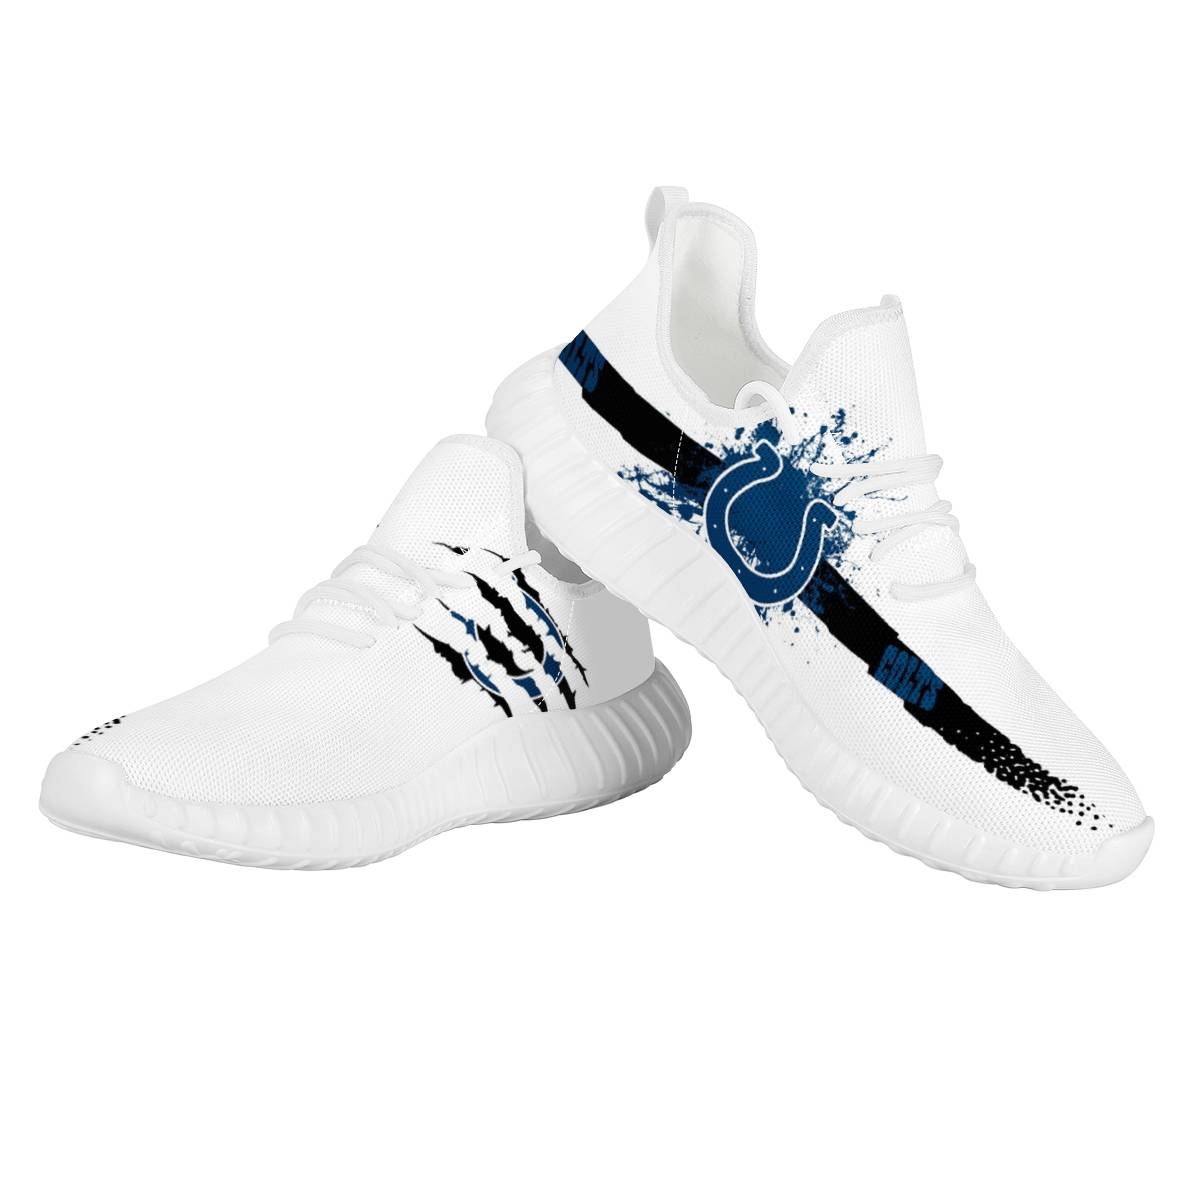 Men's Indianapolis Colts Mesh Knit Sneakers/Shoes 005